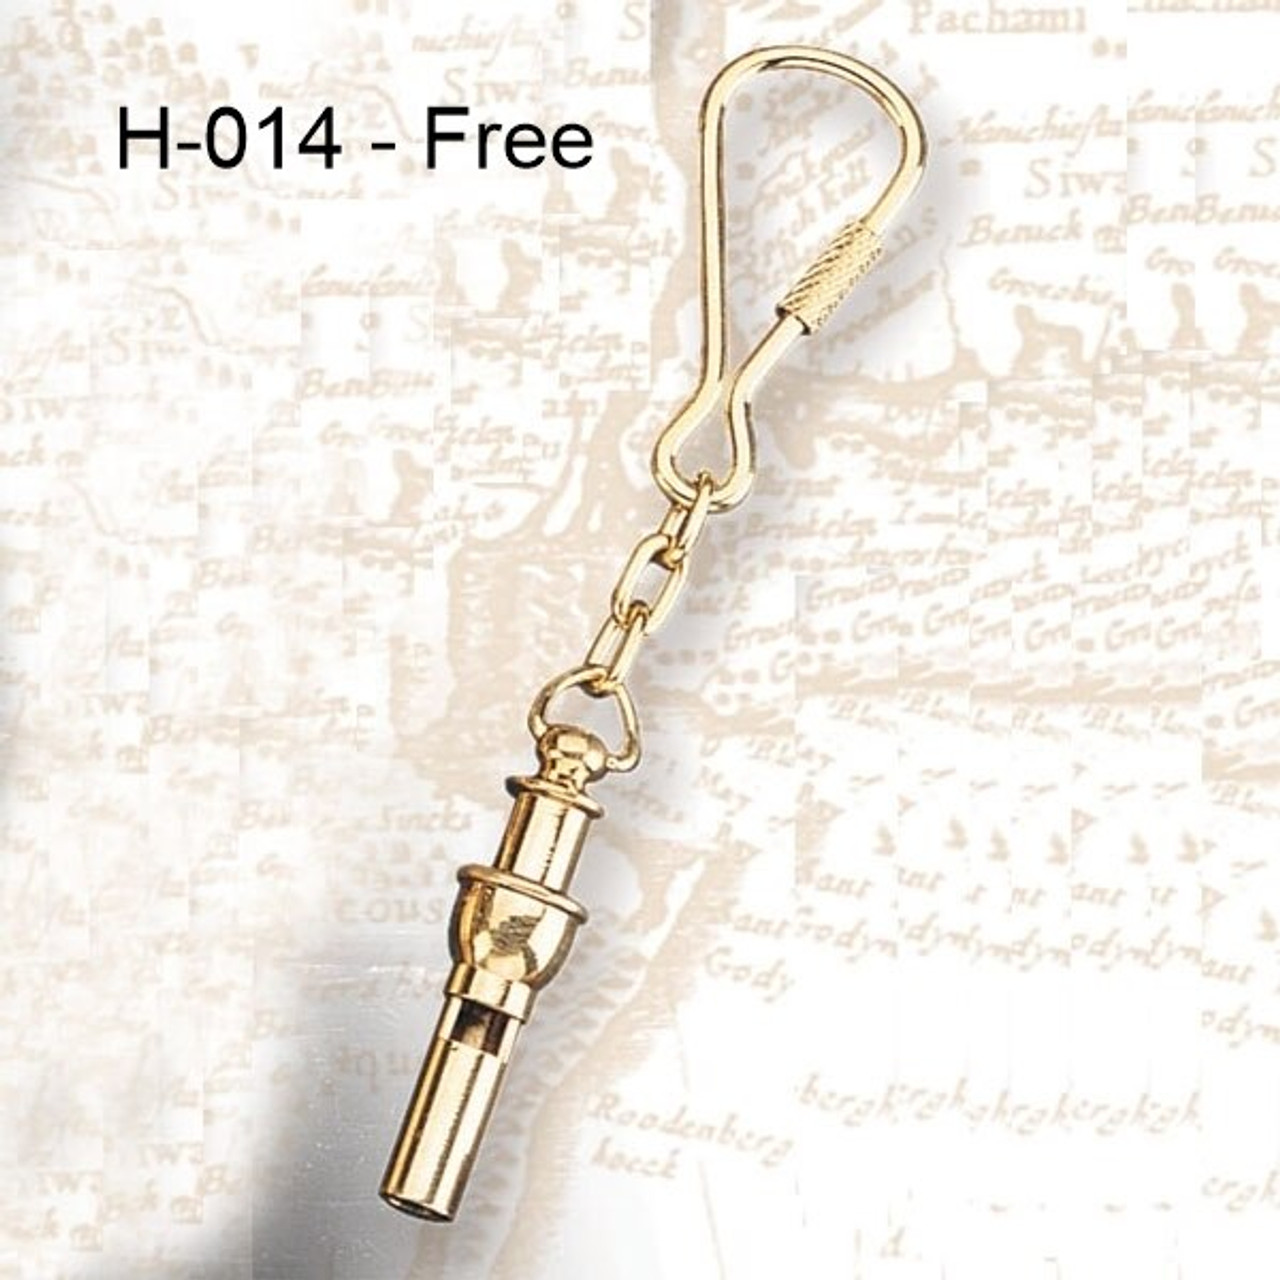 H - 014 -  Bosun's Whistle Key Chain Option
Free with Purchase of (BP-719B) Brass and Wood "Crew's Quarters" Wall Plaque